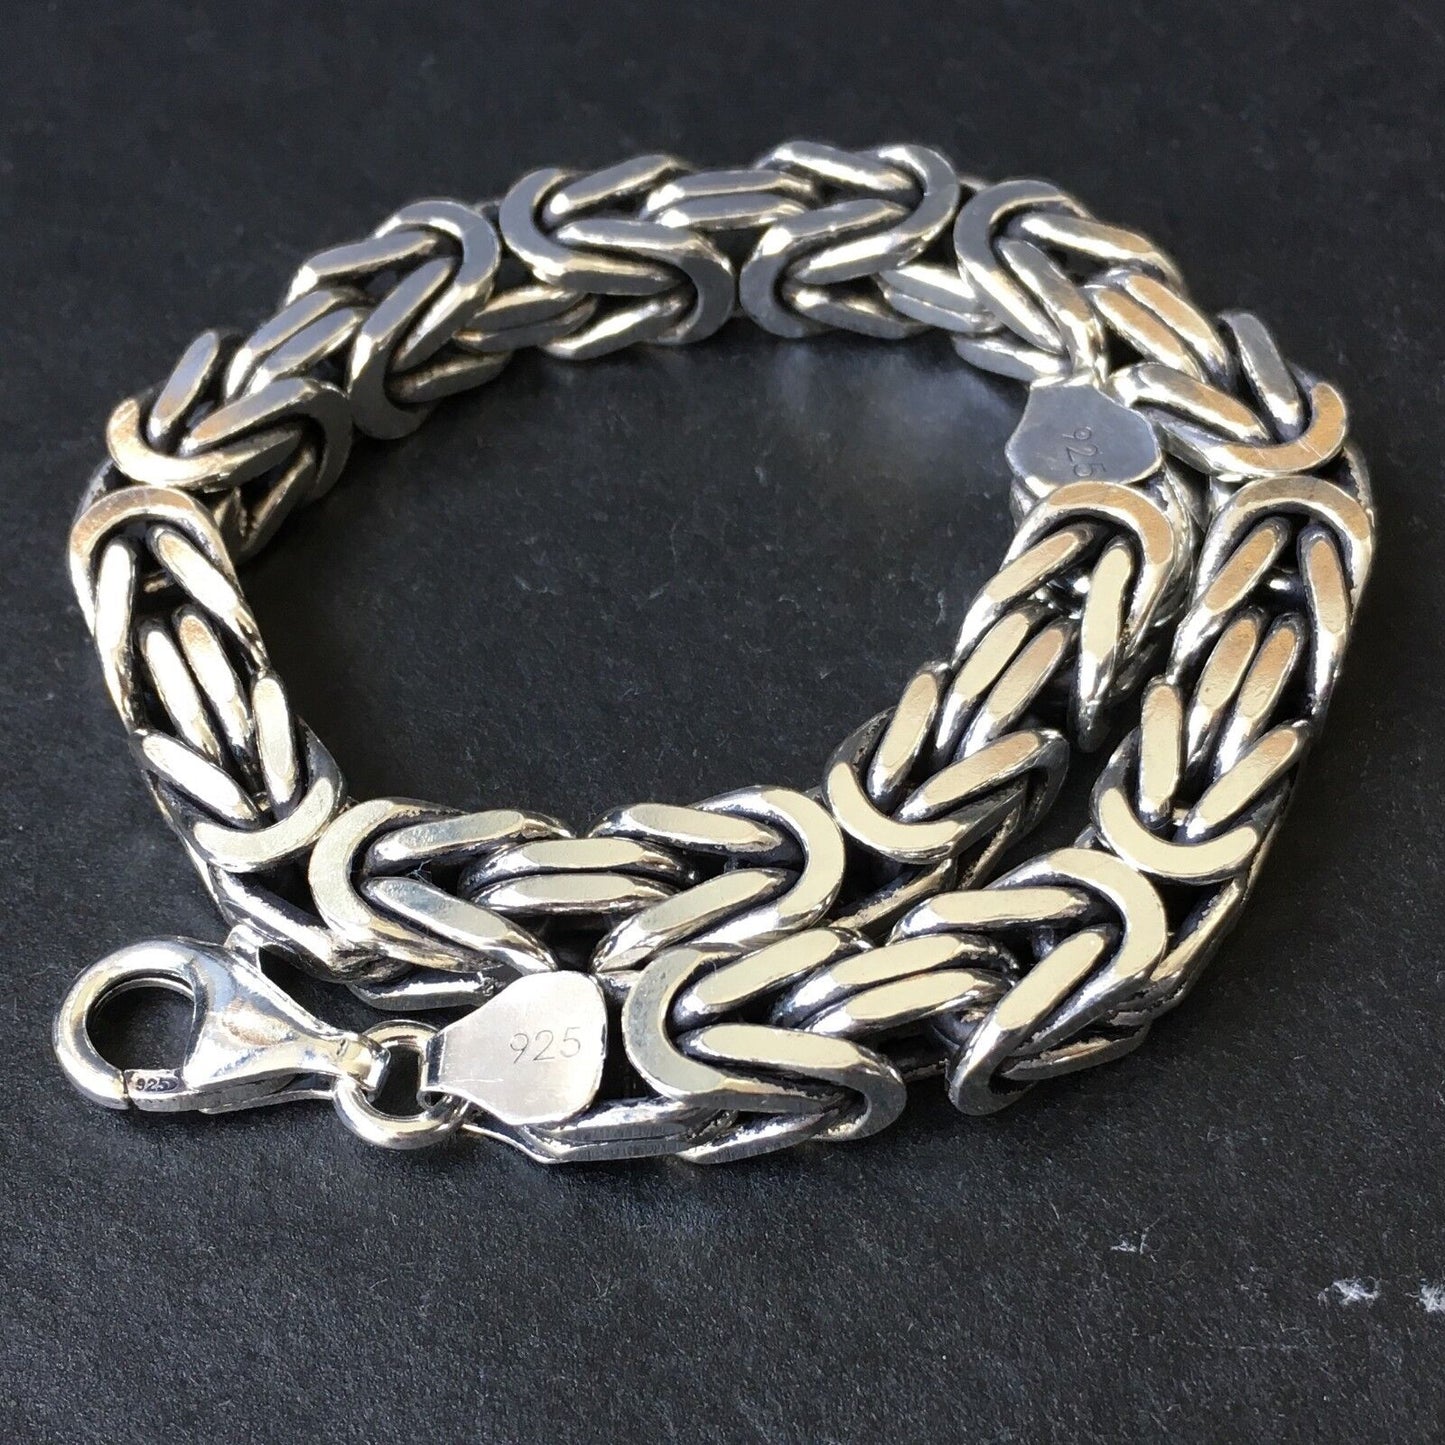 925 Sterling Silver King's Chain Bracelet Cubic 7mm Solid Men's Jewelry